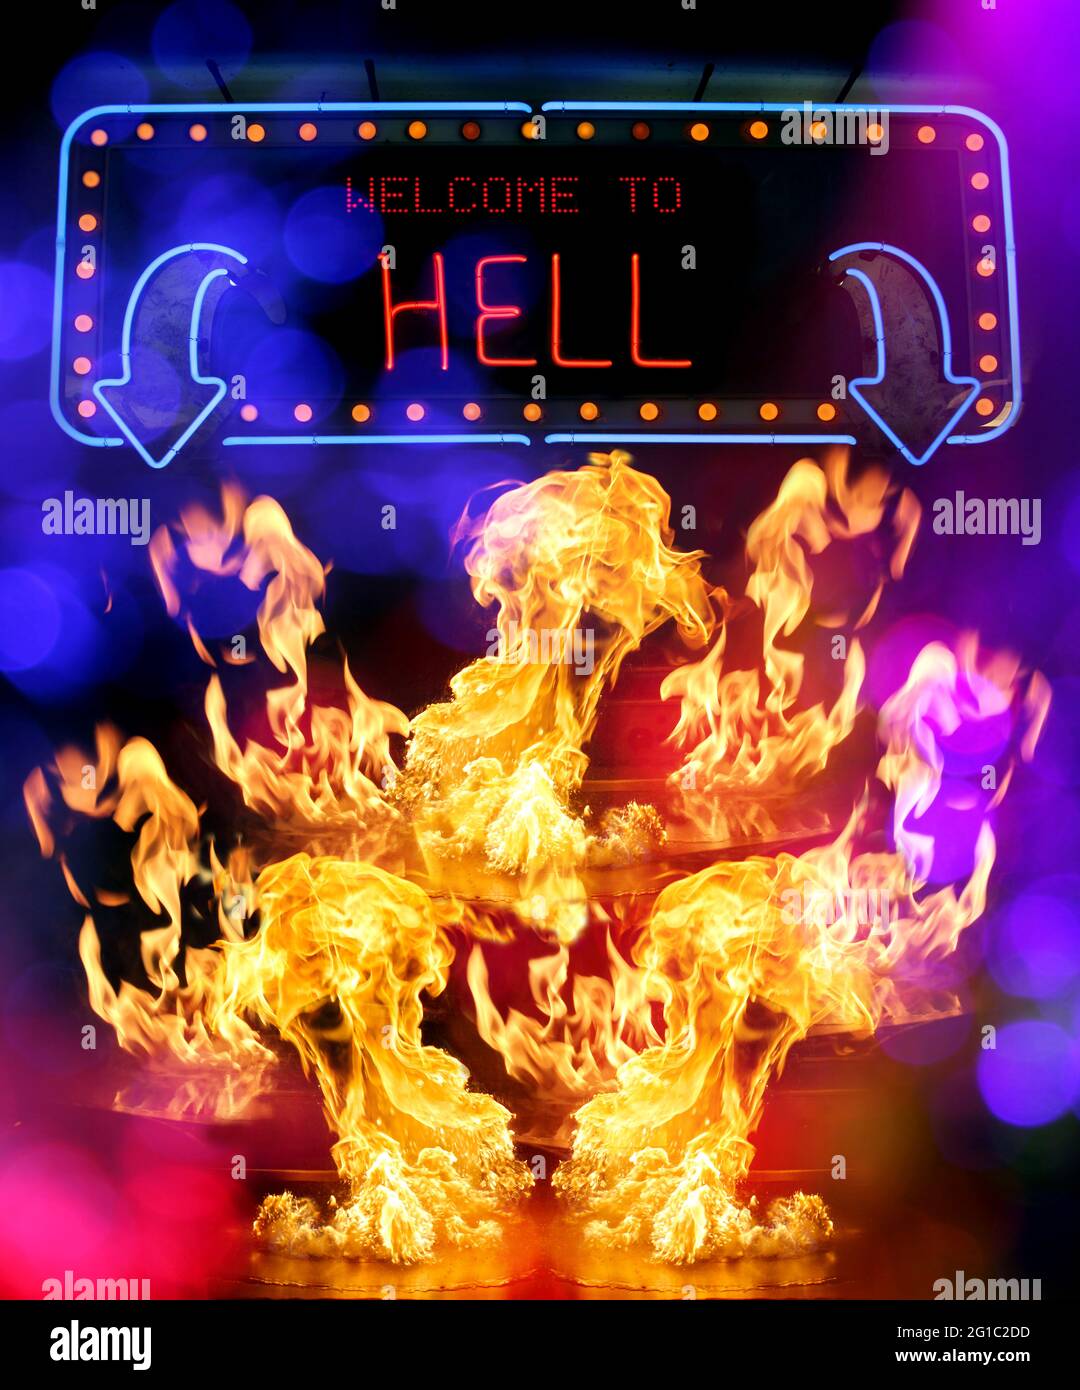 Welcome To Hell Neon Sign With Flames Compoet Stock Photo Alamy